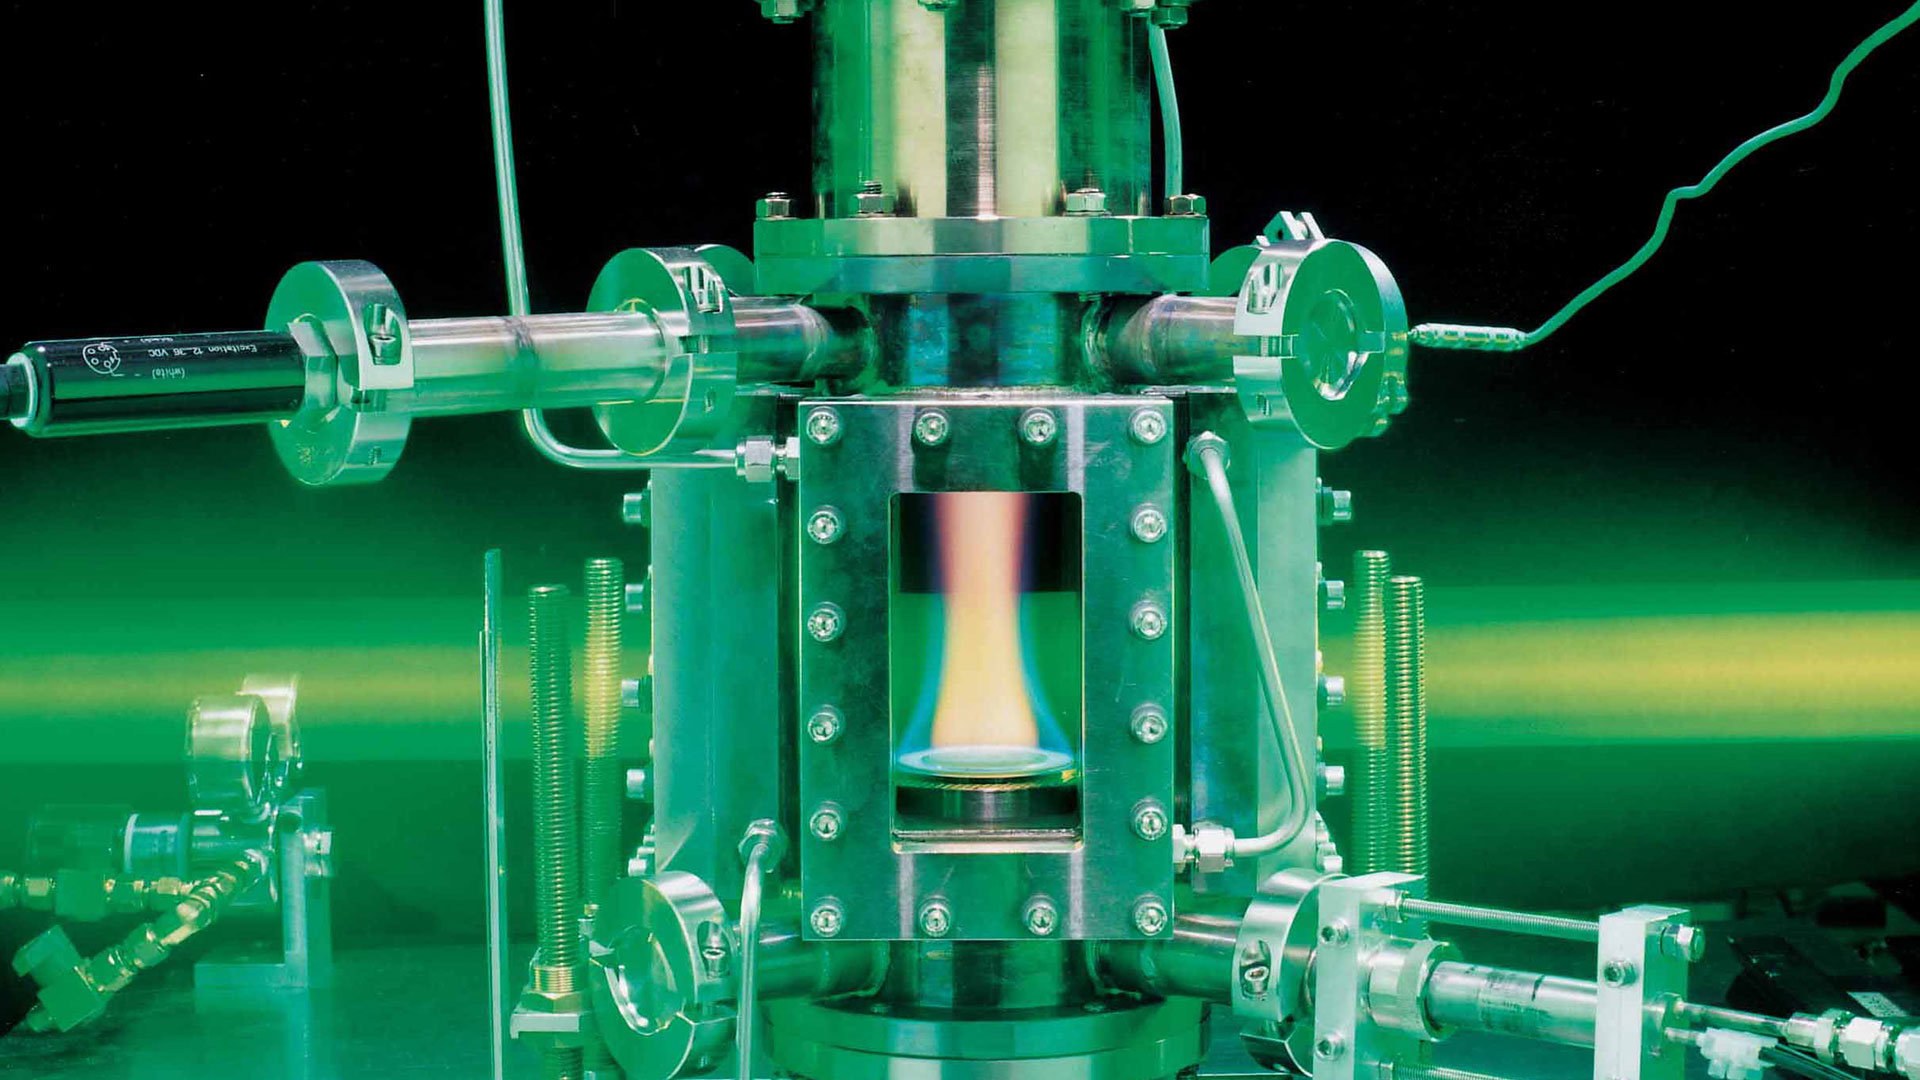 The Coflame burner enables systematic investigations for clean combustion